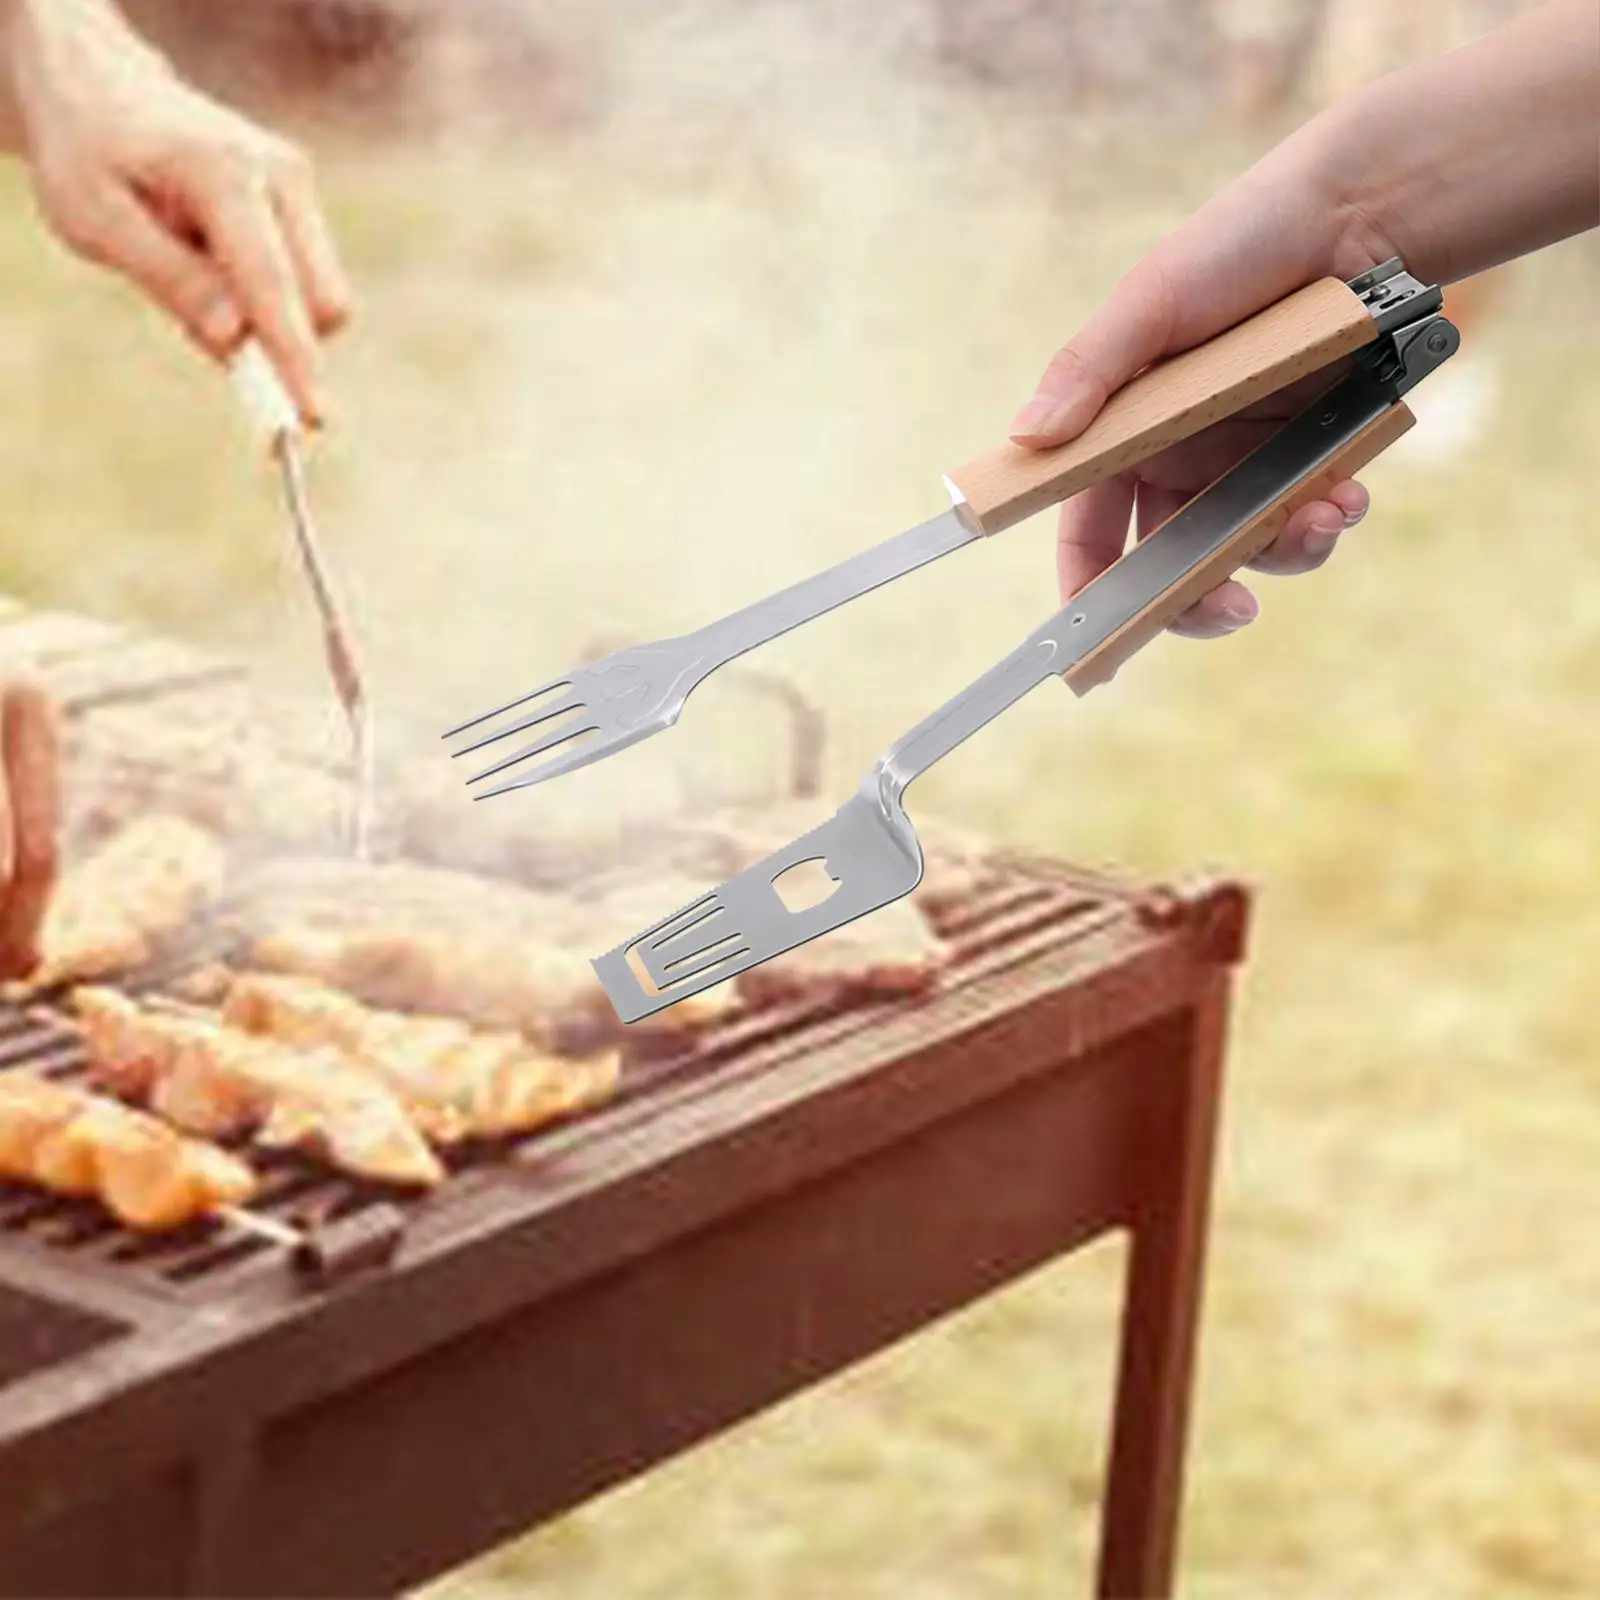 Kitchen Tongs Portable Barbecue Serving Utensils Stainless Steel Grill Tongs for Buffet Food Parties Baking Camping Entertaining